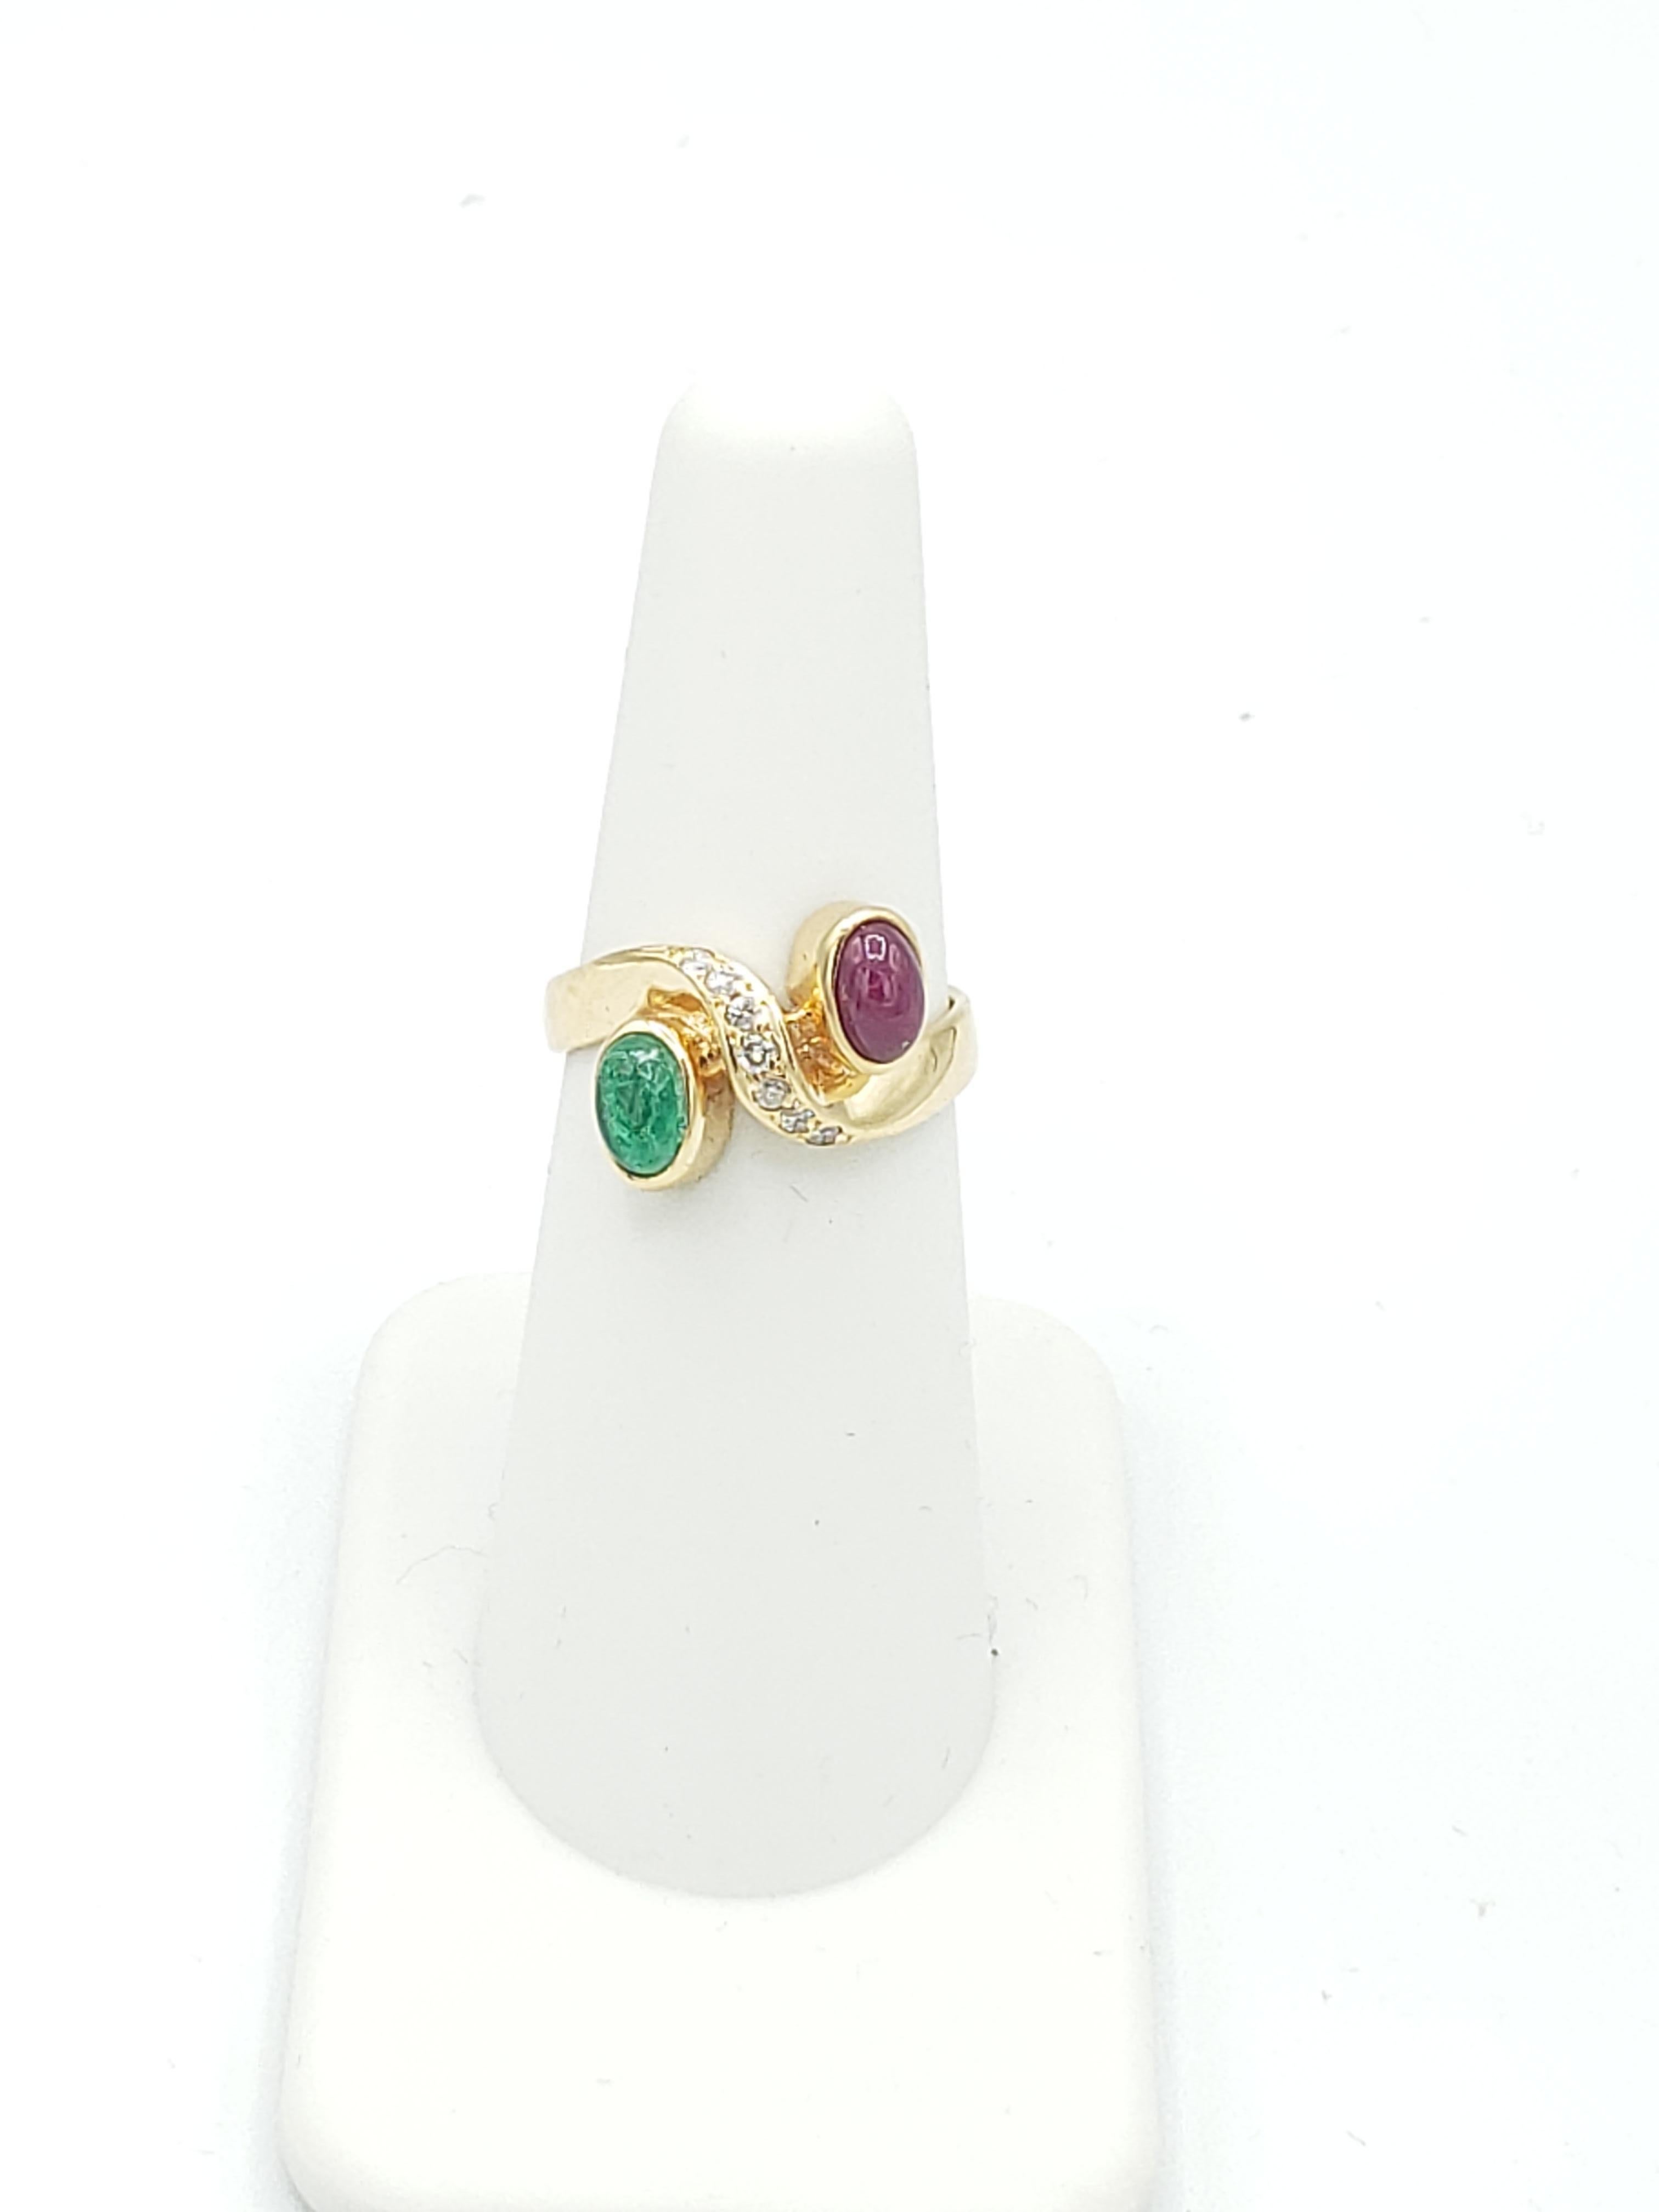 This stunning ring from LaFrancee features a beautiful natural oval-shaped ruby and emerald set in 14k solid yellow gold. The gemstones are accented by dazzling diamonds, making this ring a truly exquisite piece of fine jewelry.

The ring is size 6,